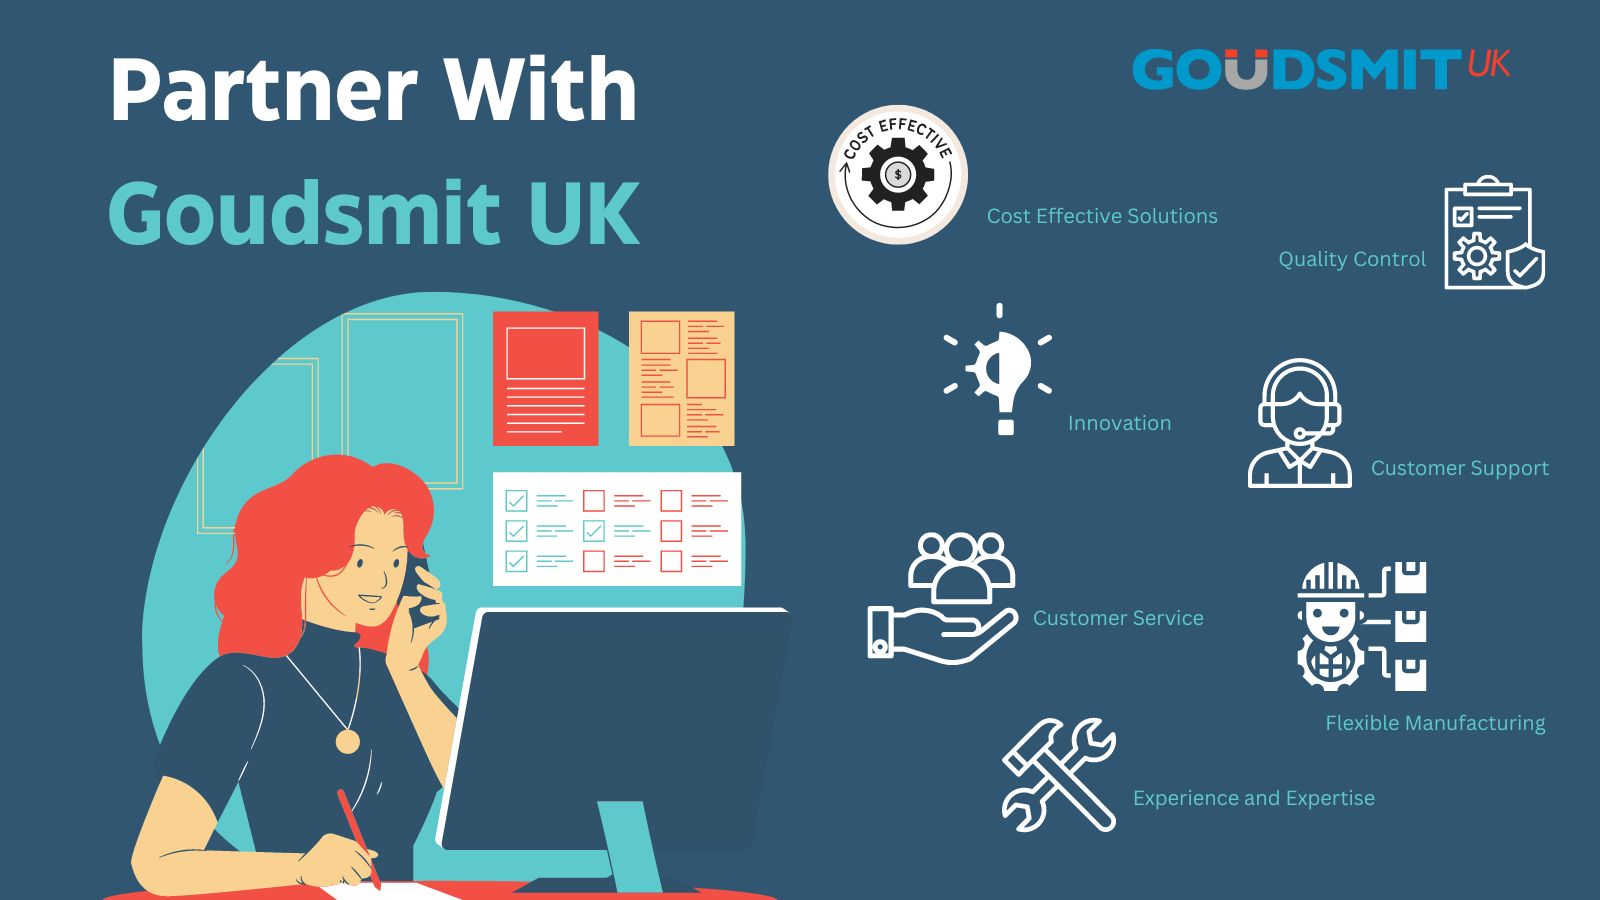 Partner with Goudsmit UK as your Manufacturing partner